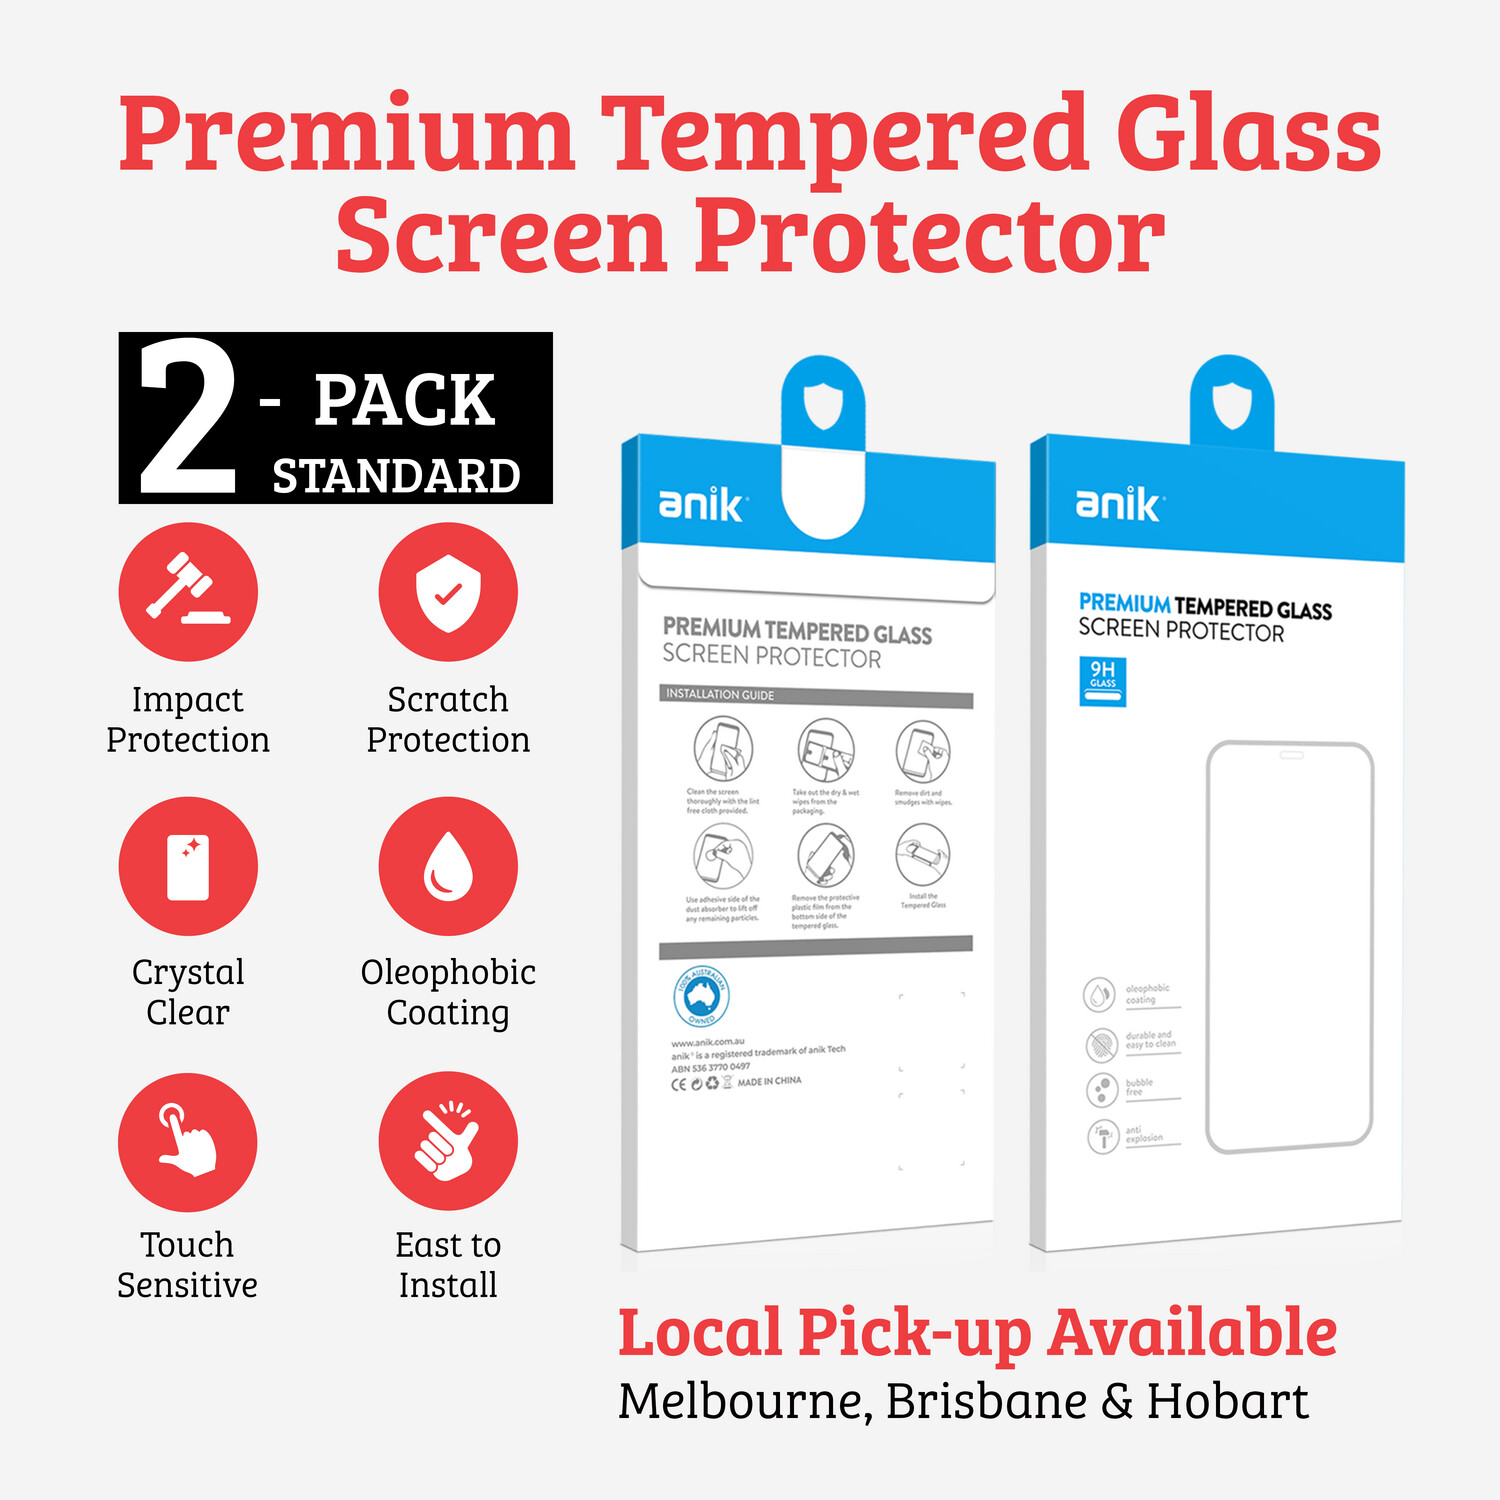 ANIK Premium Standard Tempered Glass Screen Protector for iPhone 7 [2 Pack]